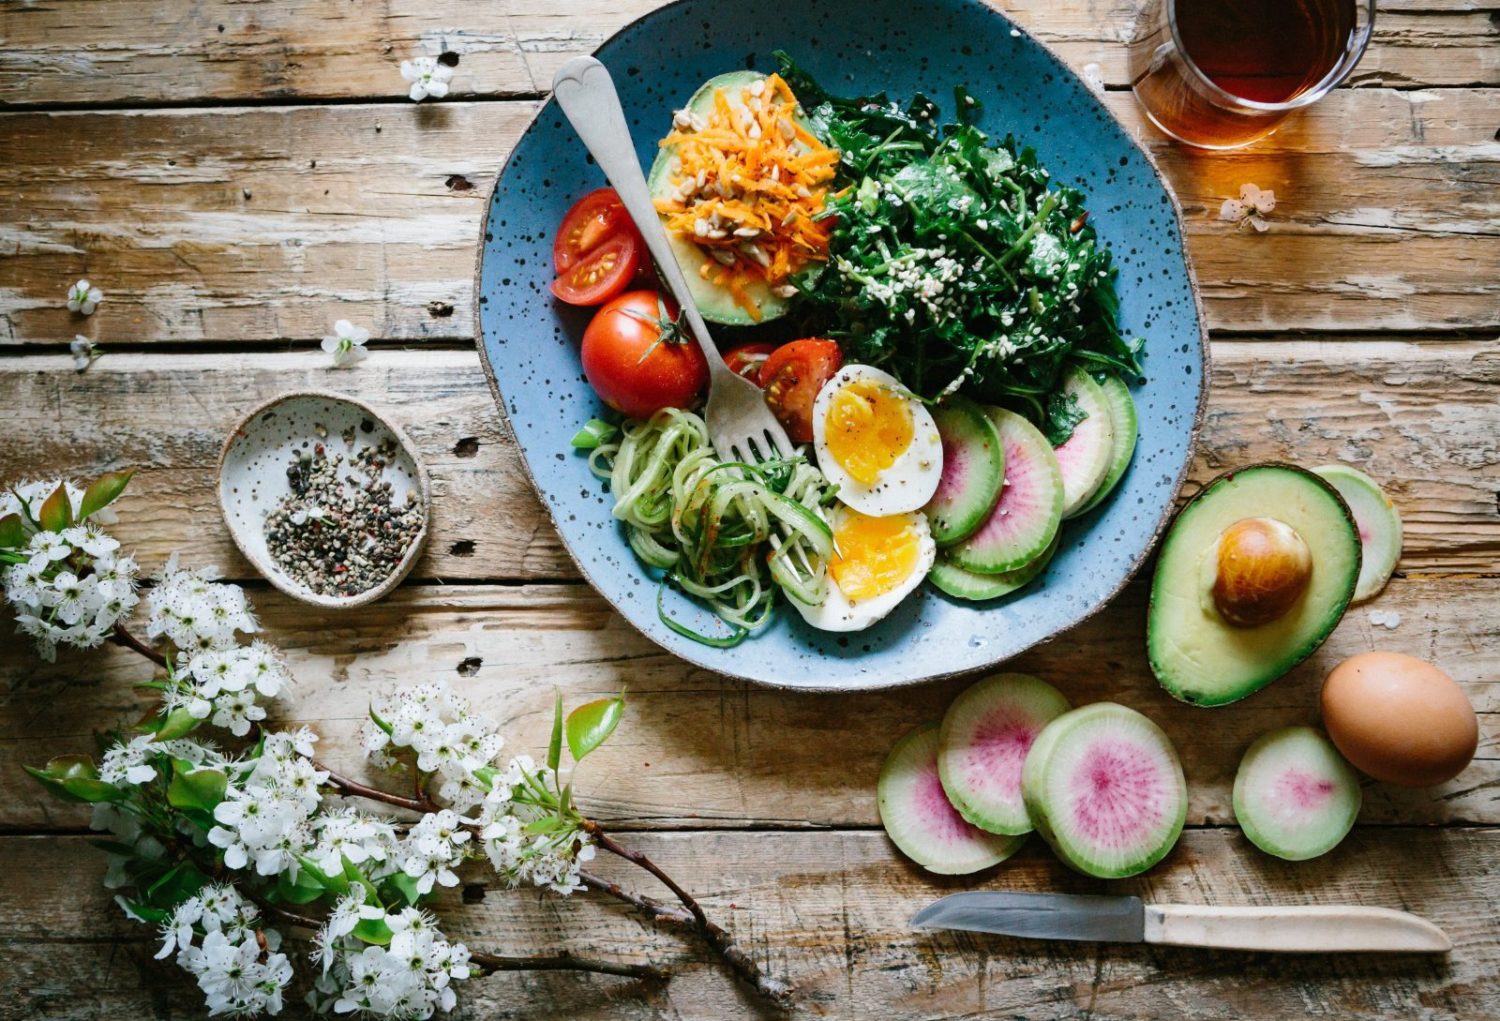 food for depression: how your diet can help improve depression